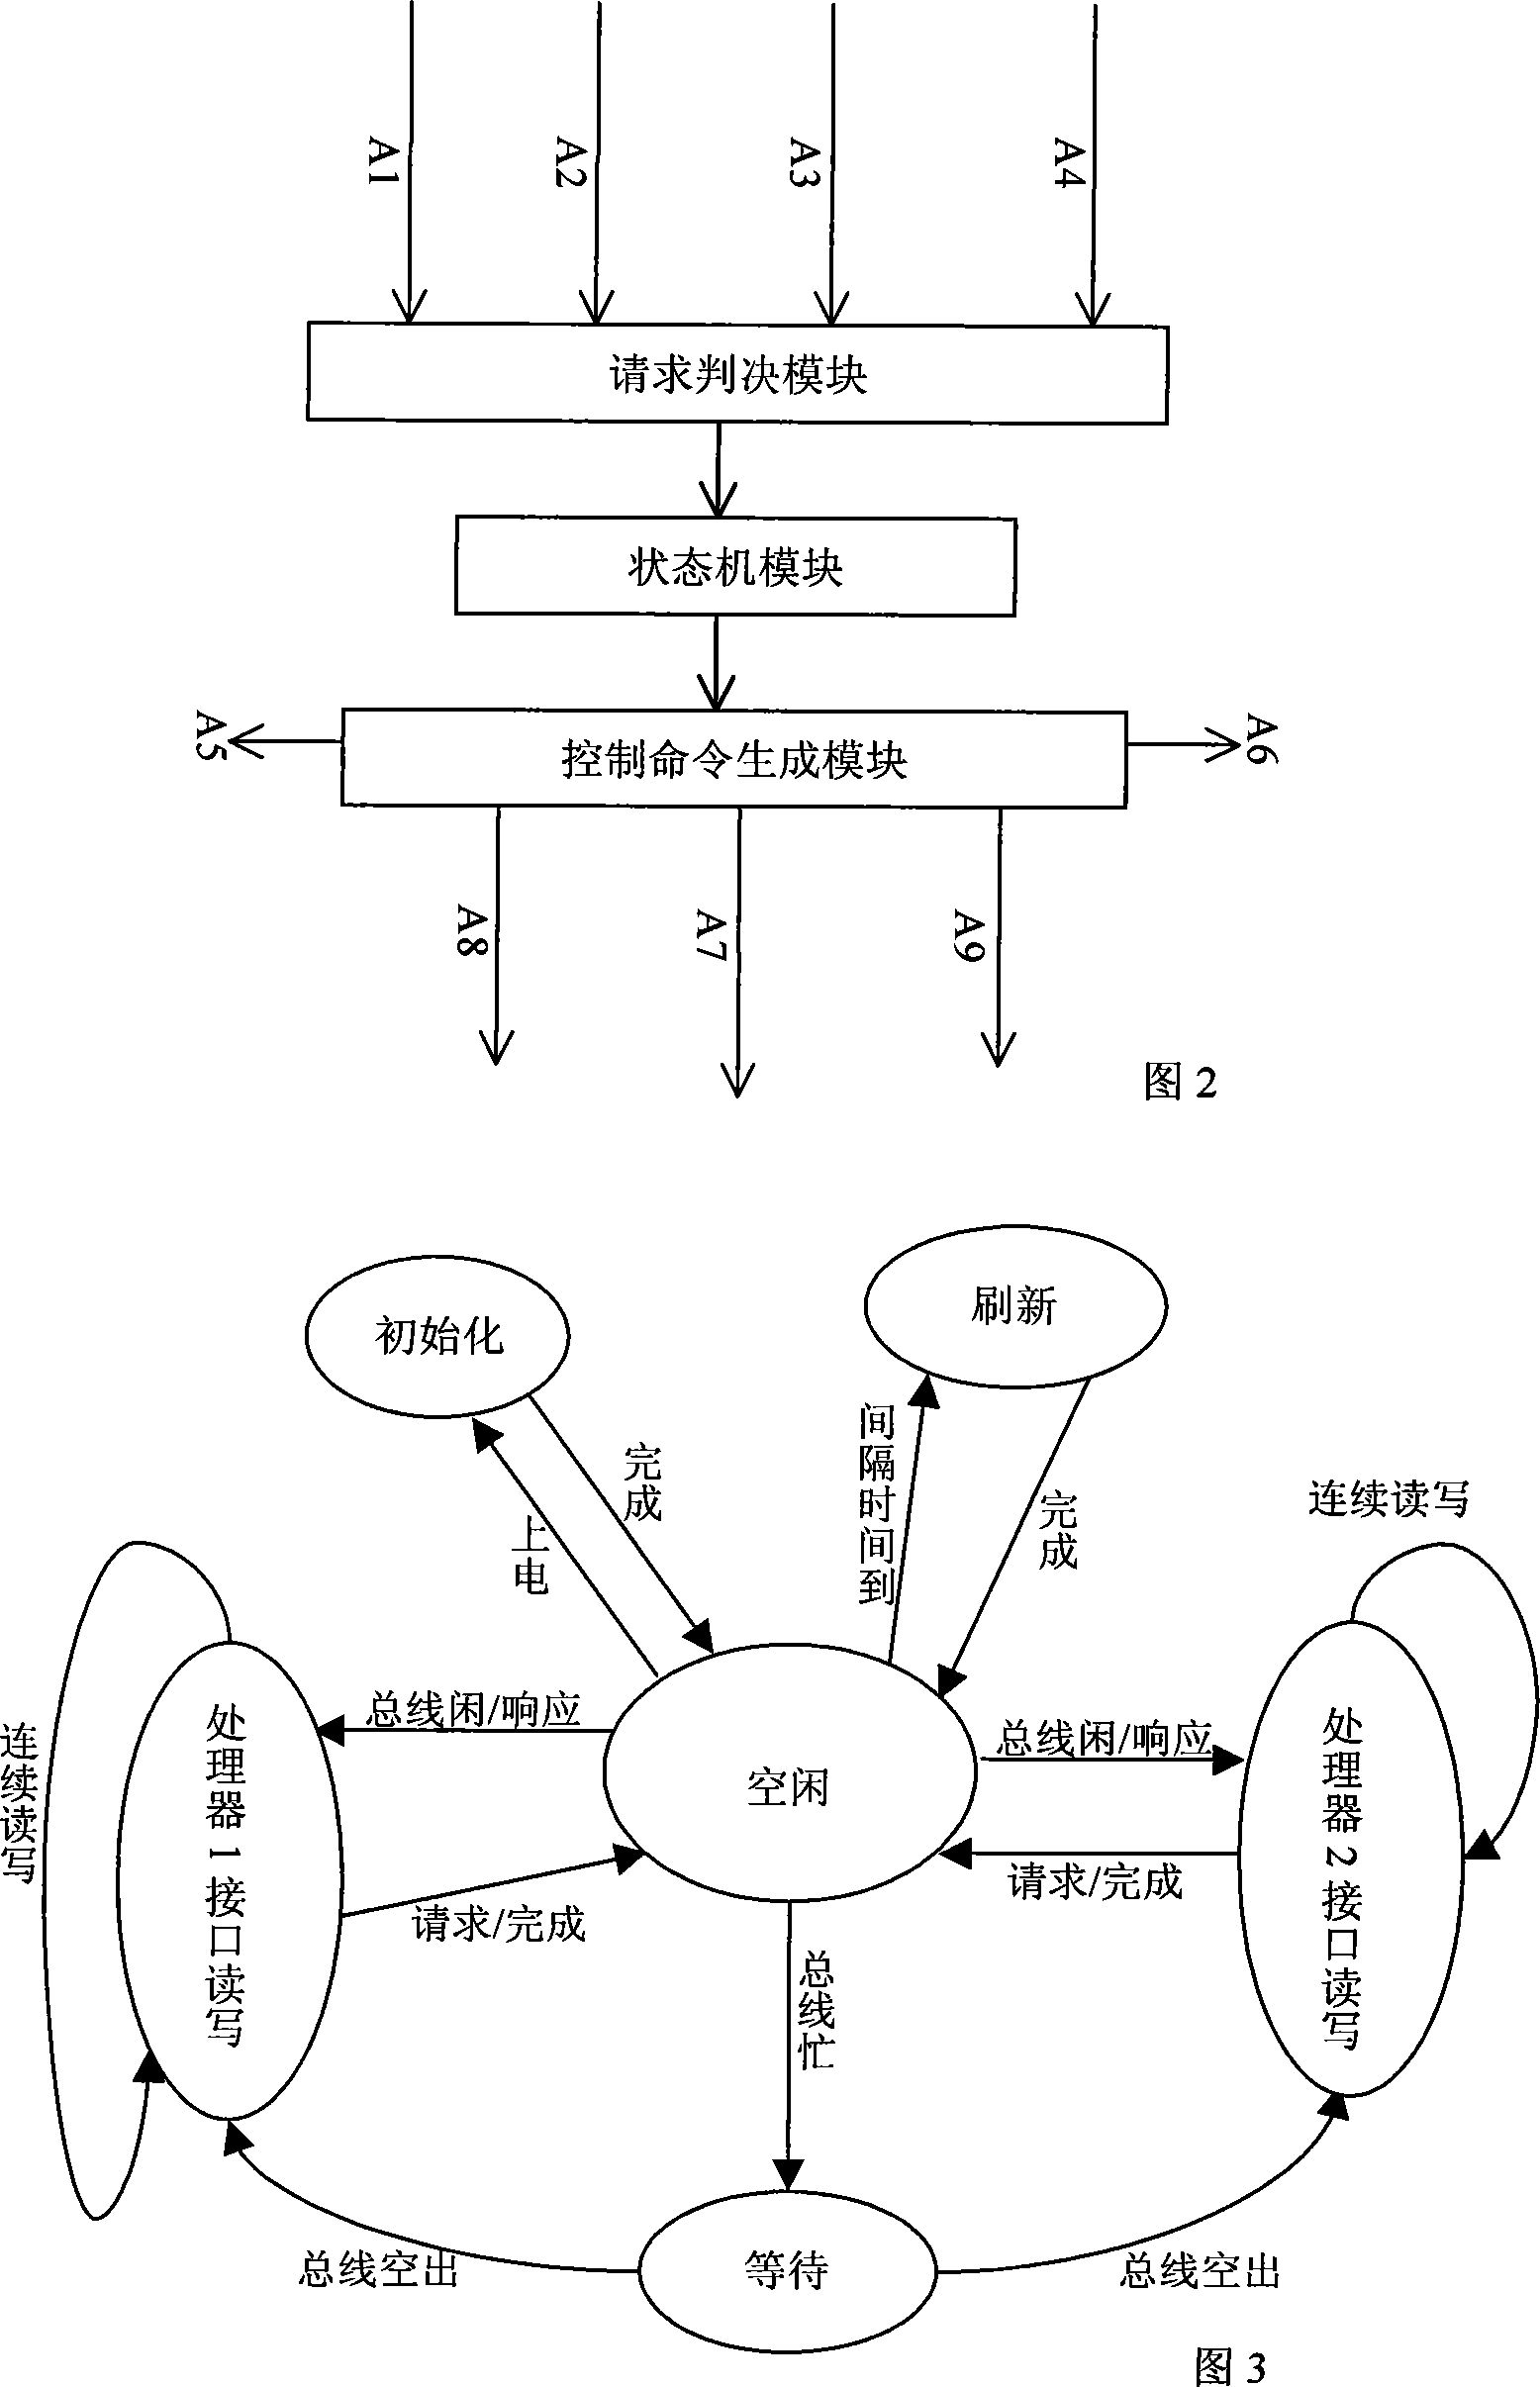 Double-port access single dynamic memory interface